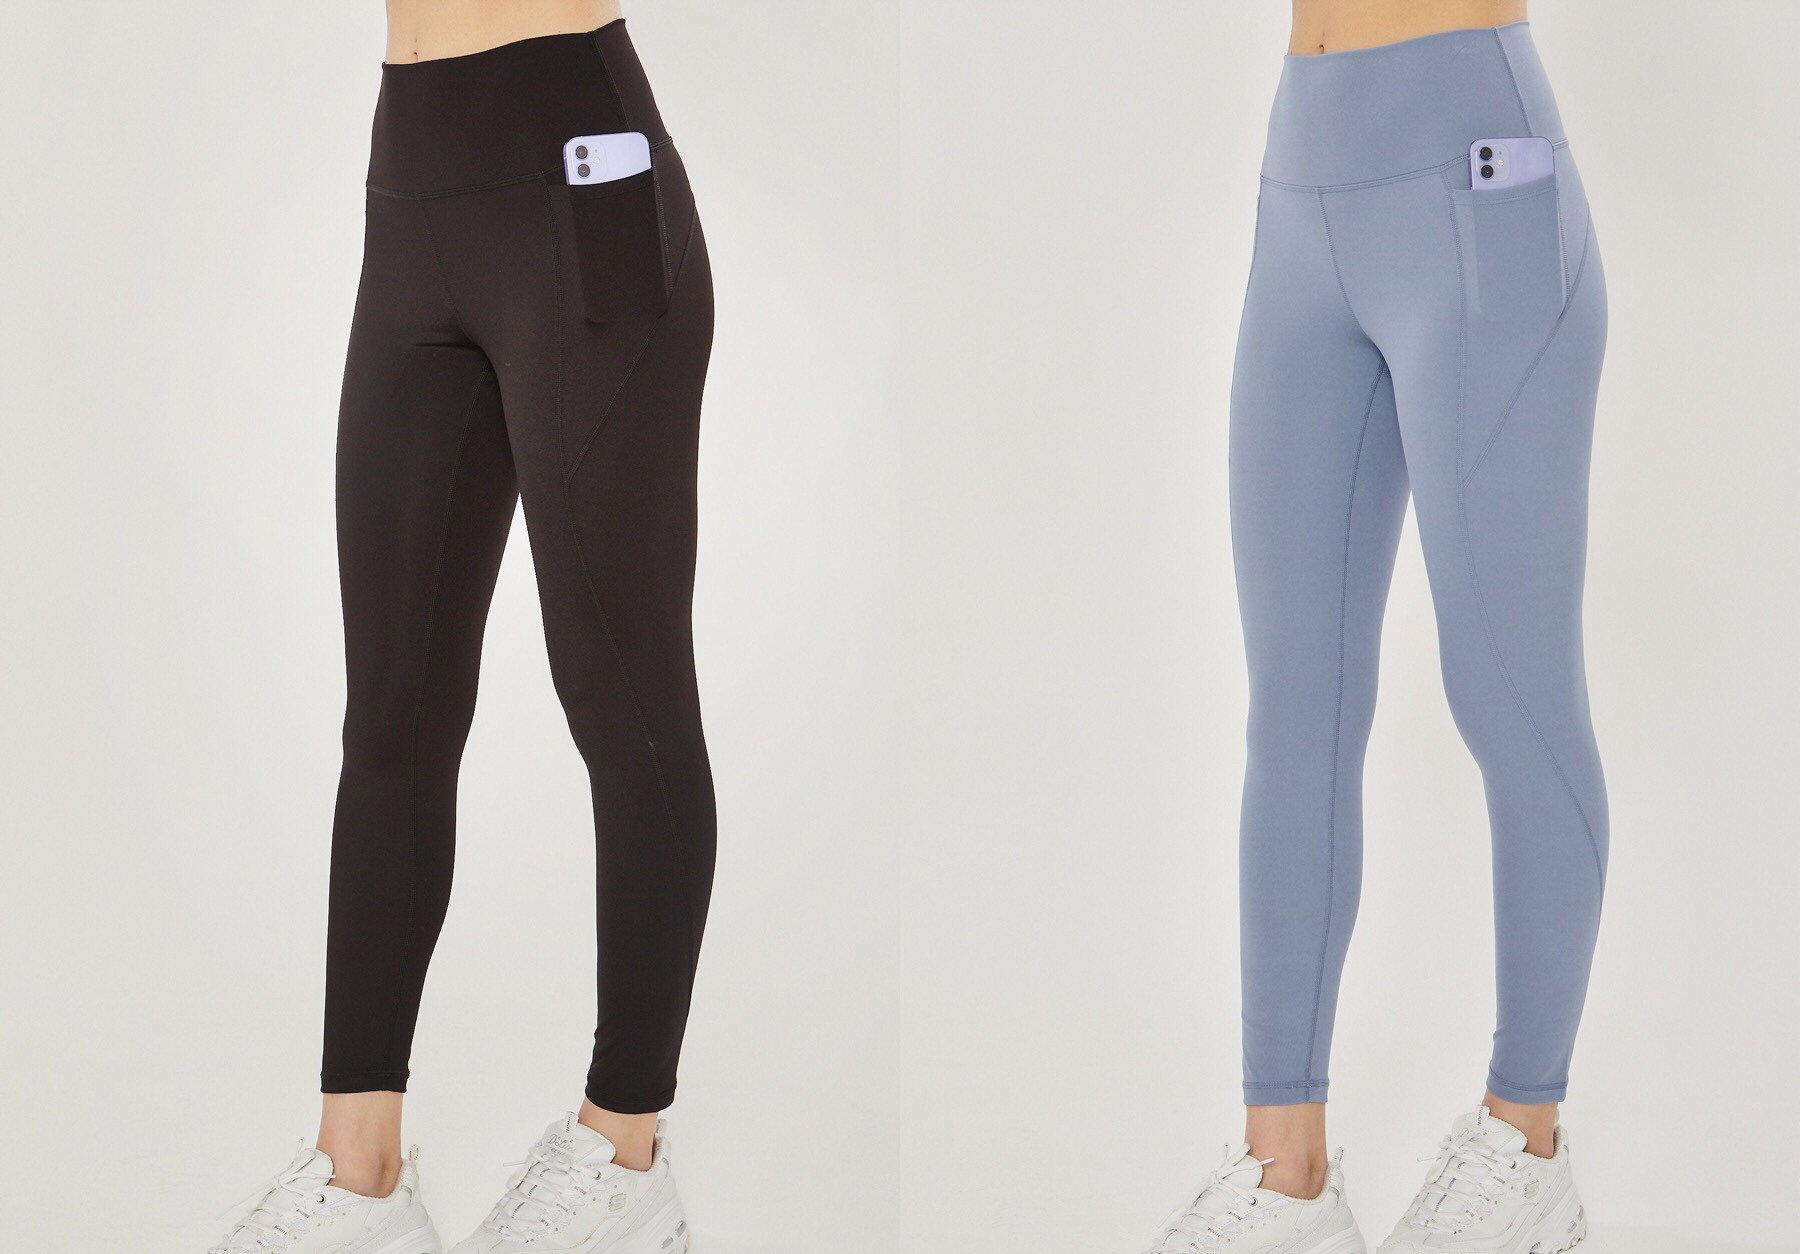 Active Leggings With Phone Pockets. Wide Waistband Athletic Leggings.  Workout Sports Full Length Moisture Wicking Legging in Black and Blue -   Ireland